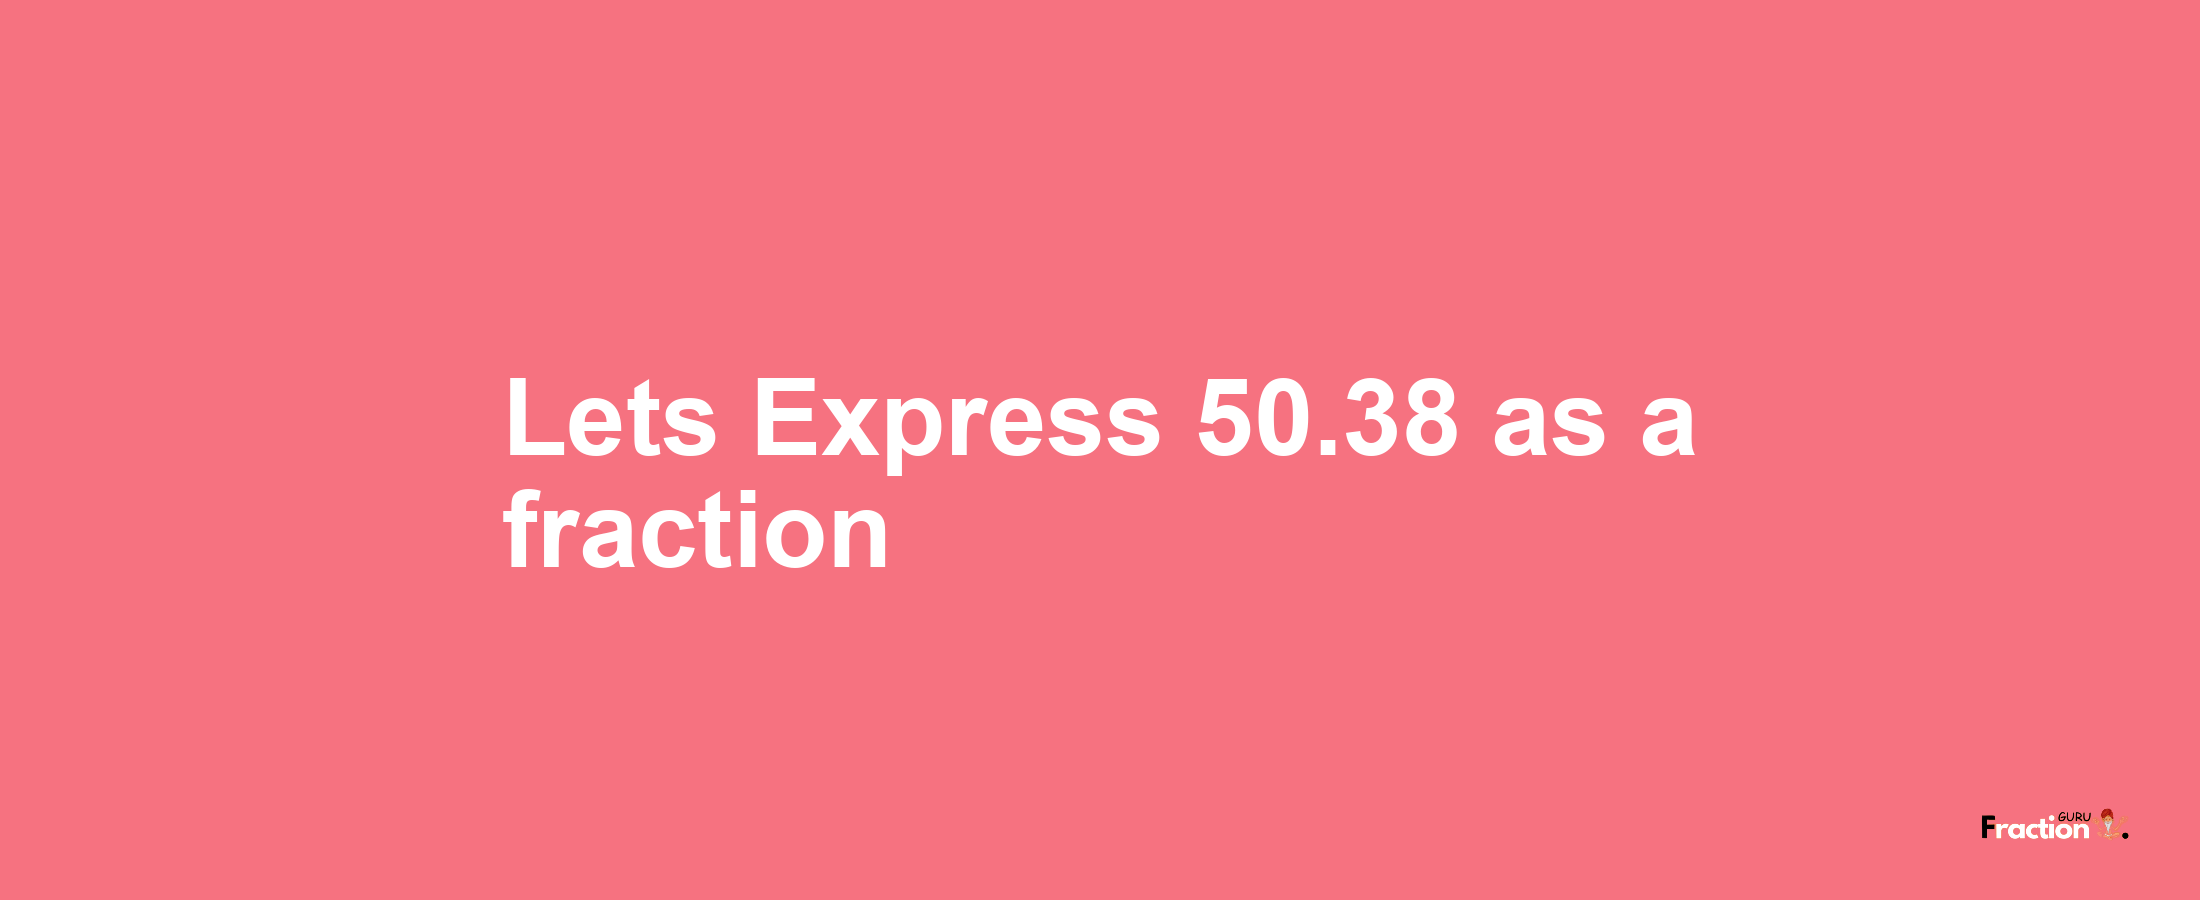 Lets Express 50.38 as afraction